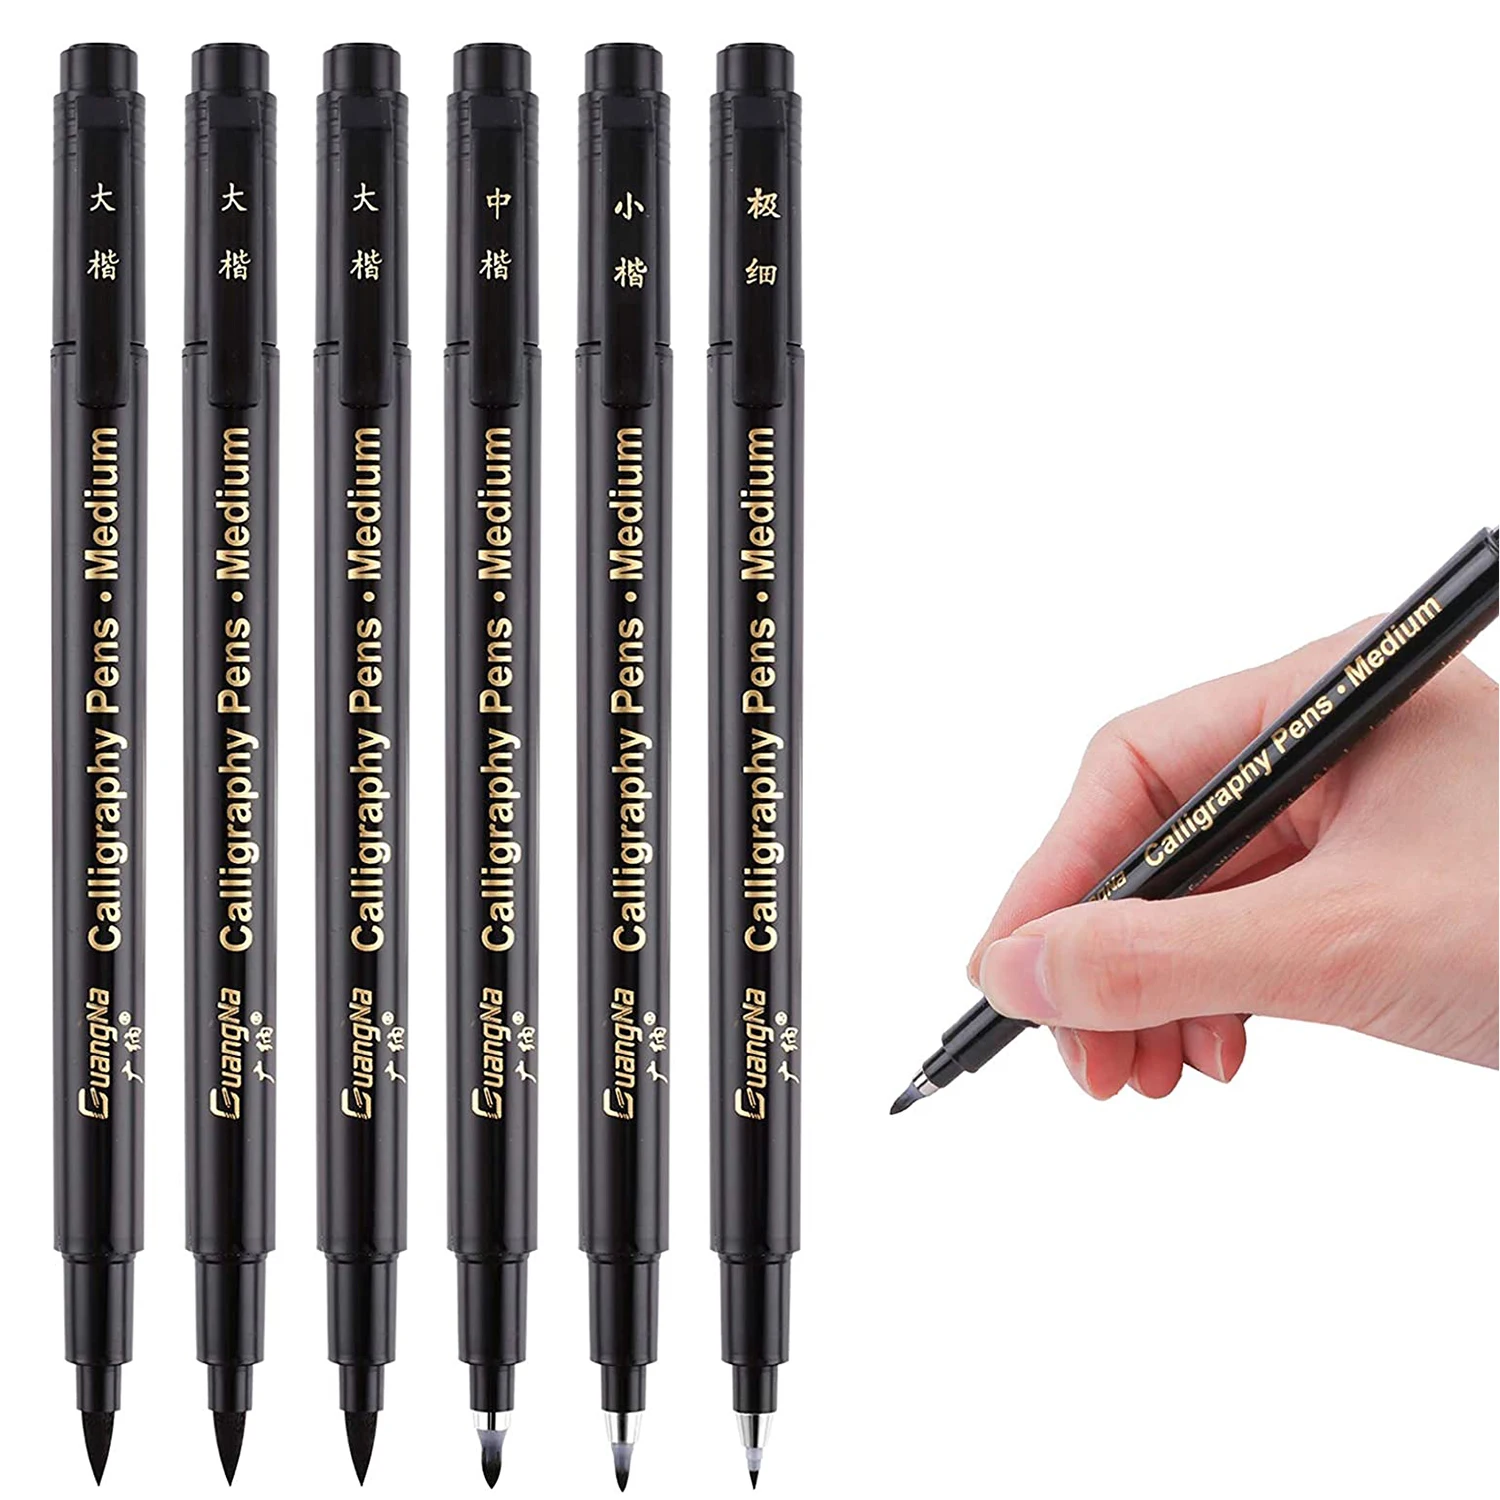 

Calligraphy Pens set for Beginners,Hand Lettering Pen,4 Size Refillable Brush&Fine Tip Black Markers for Kids,Writing, Signature